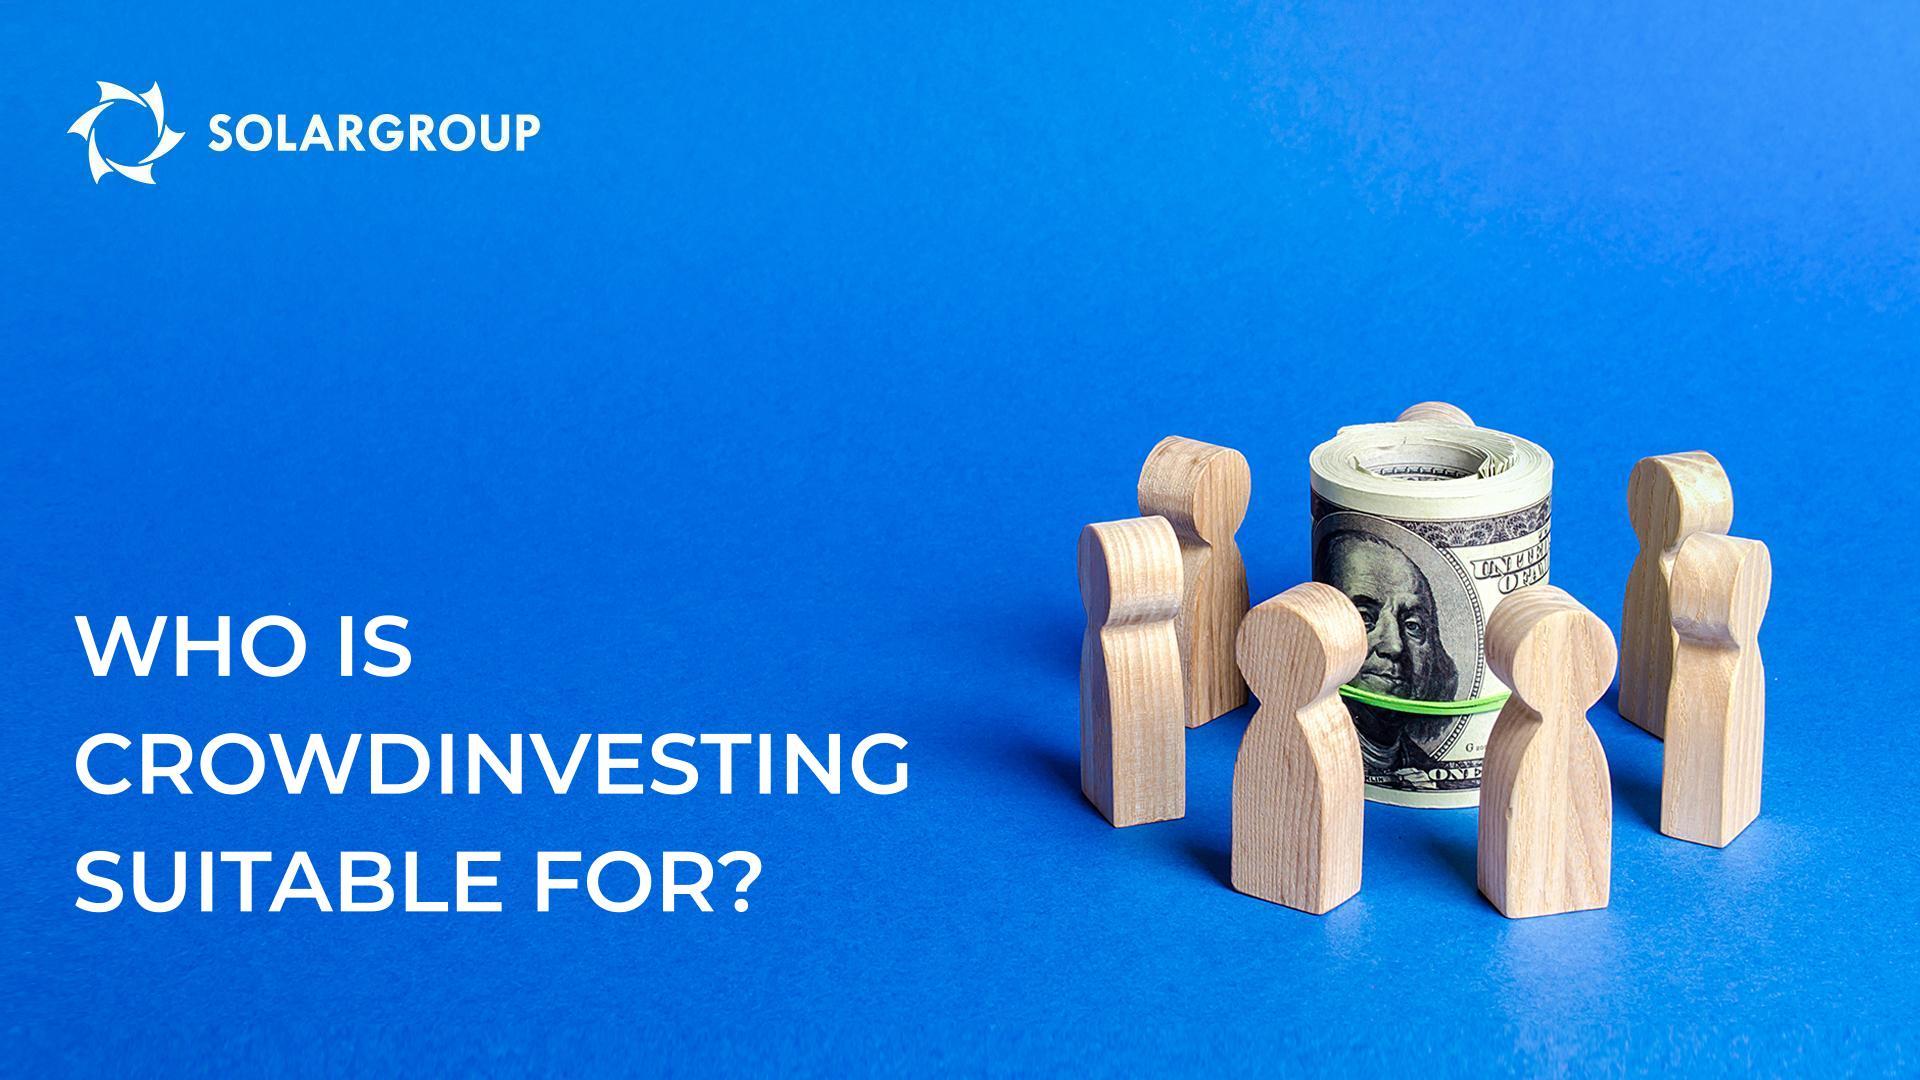 Who is crowdinvesting suitable for?